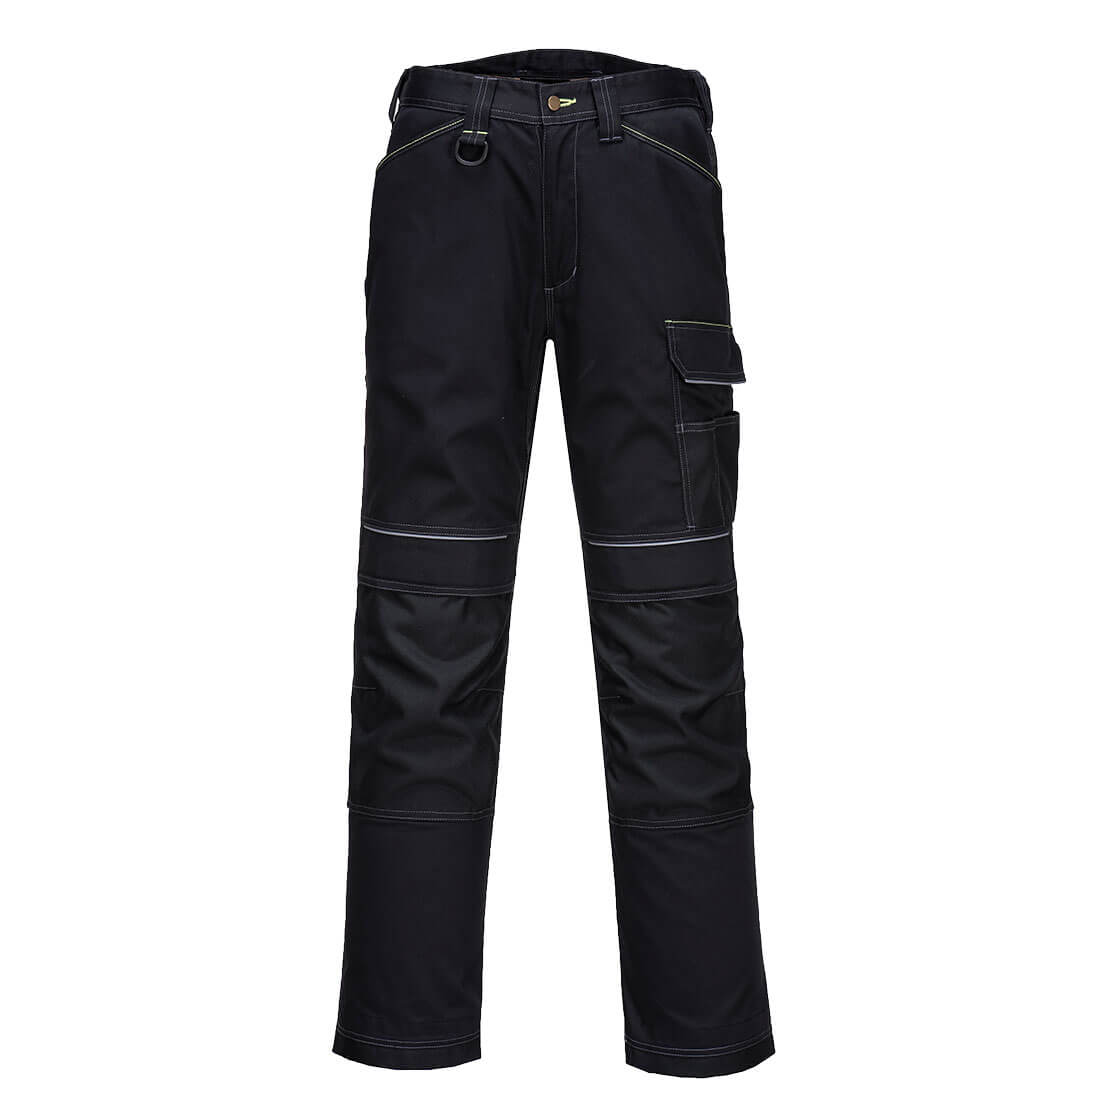 Portwest PW358 - PW3 Lined Winter Holster Trousers